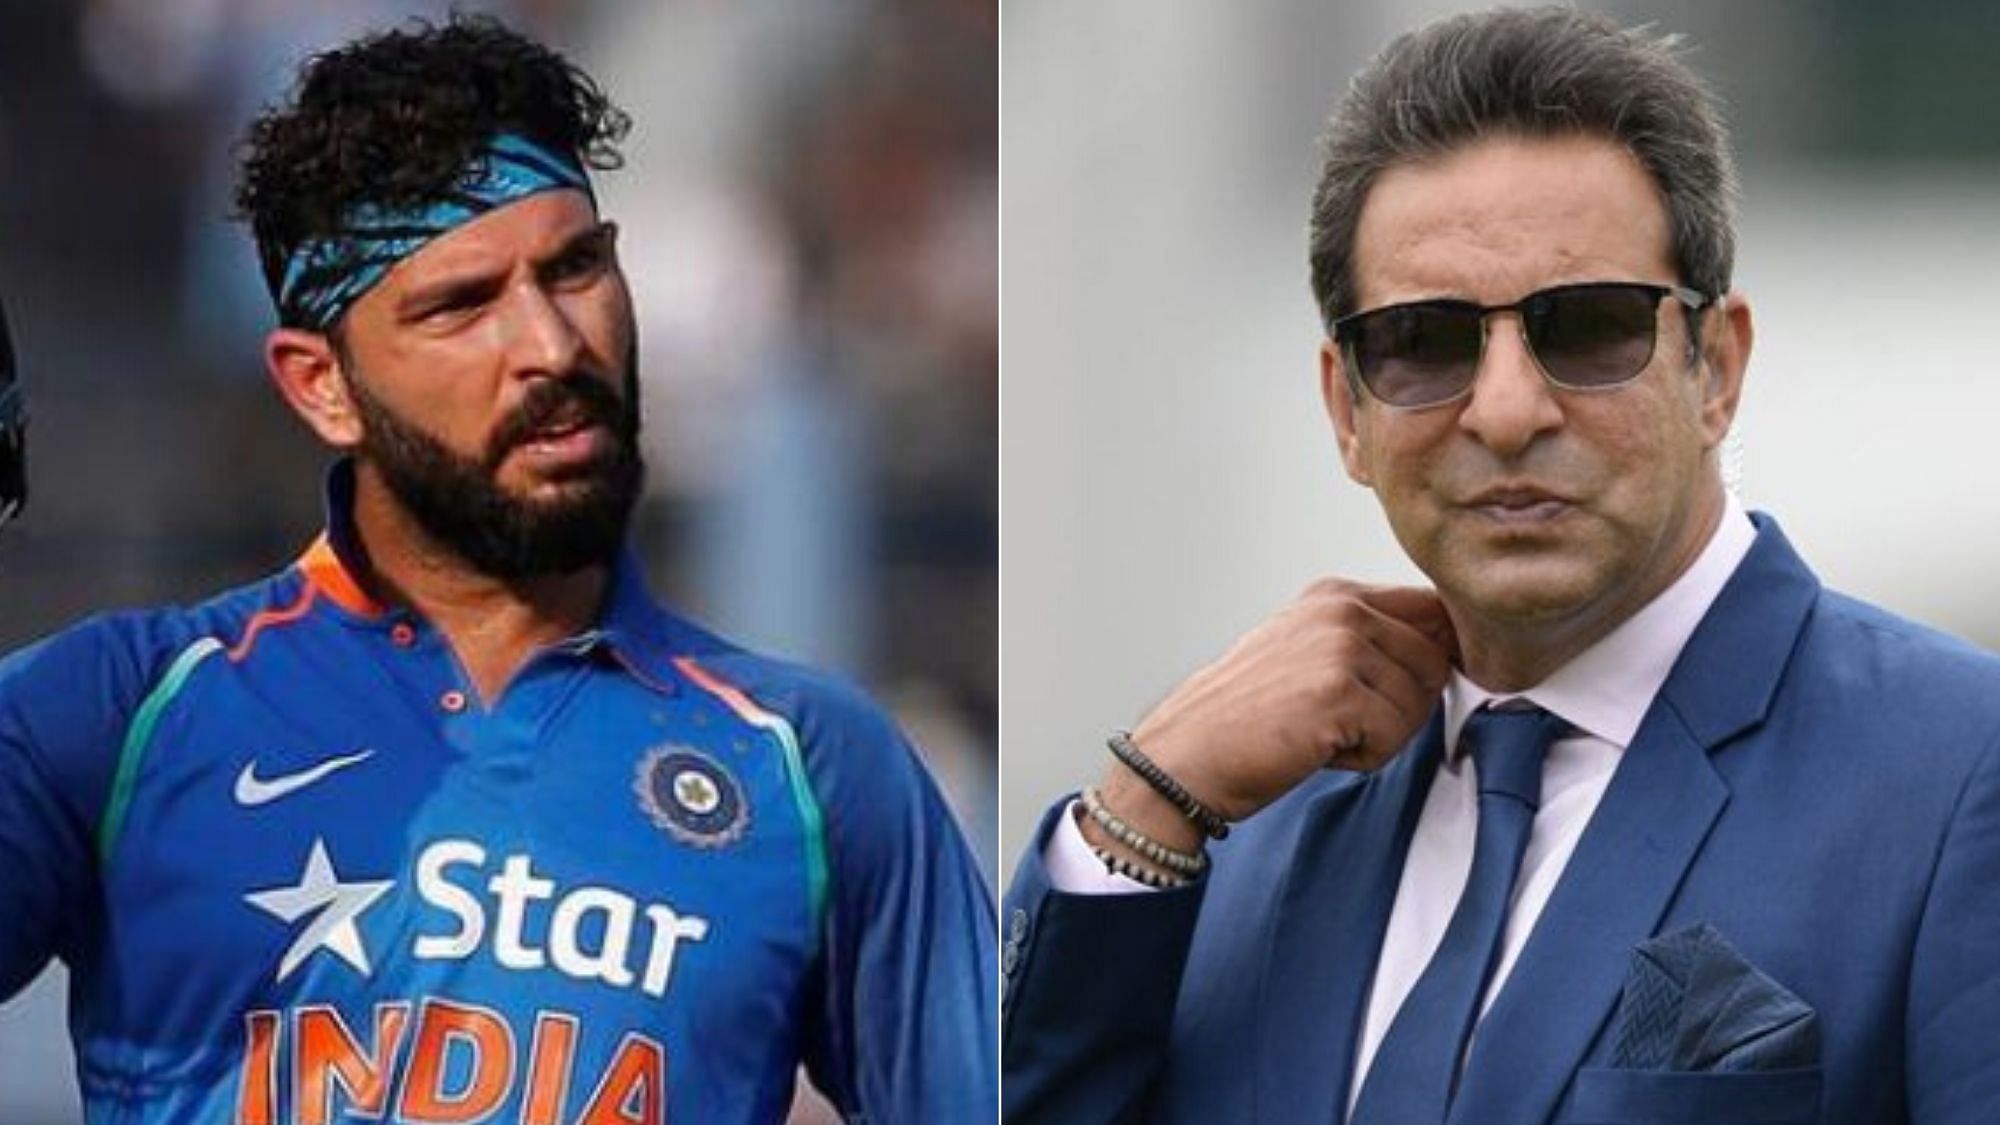 Yuvraj Singh and Wasim Akram are the first international players to confirm their availability for the Bushfire Cricket Bash fundraising match on 8 February.